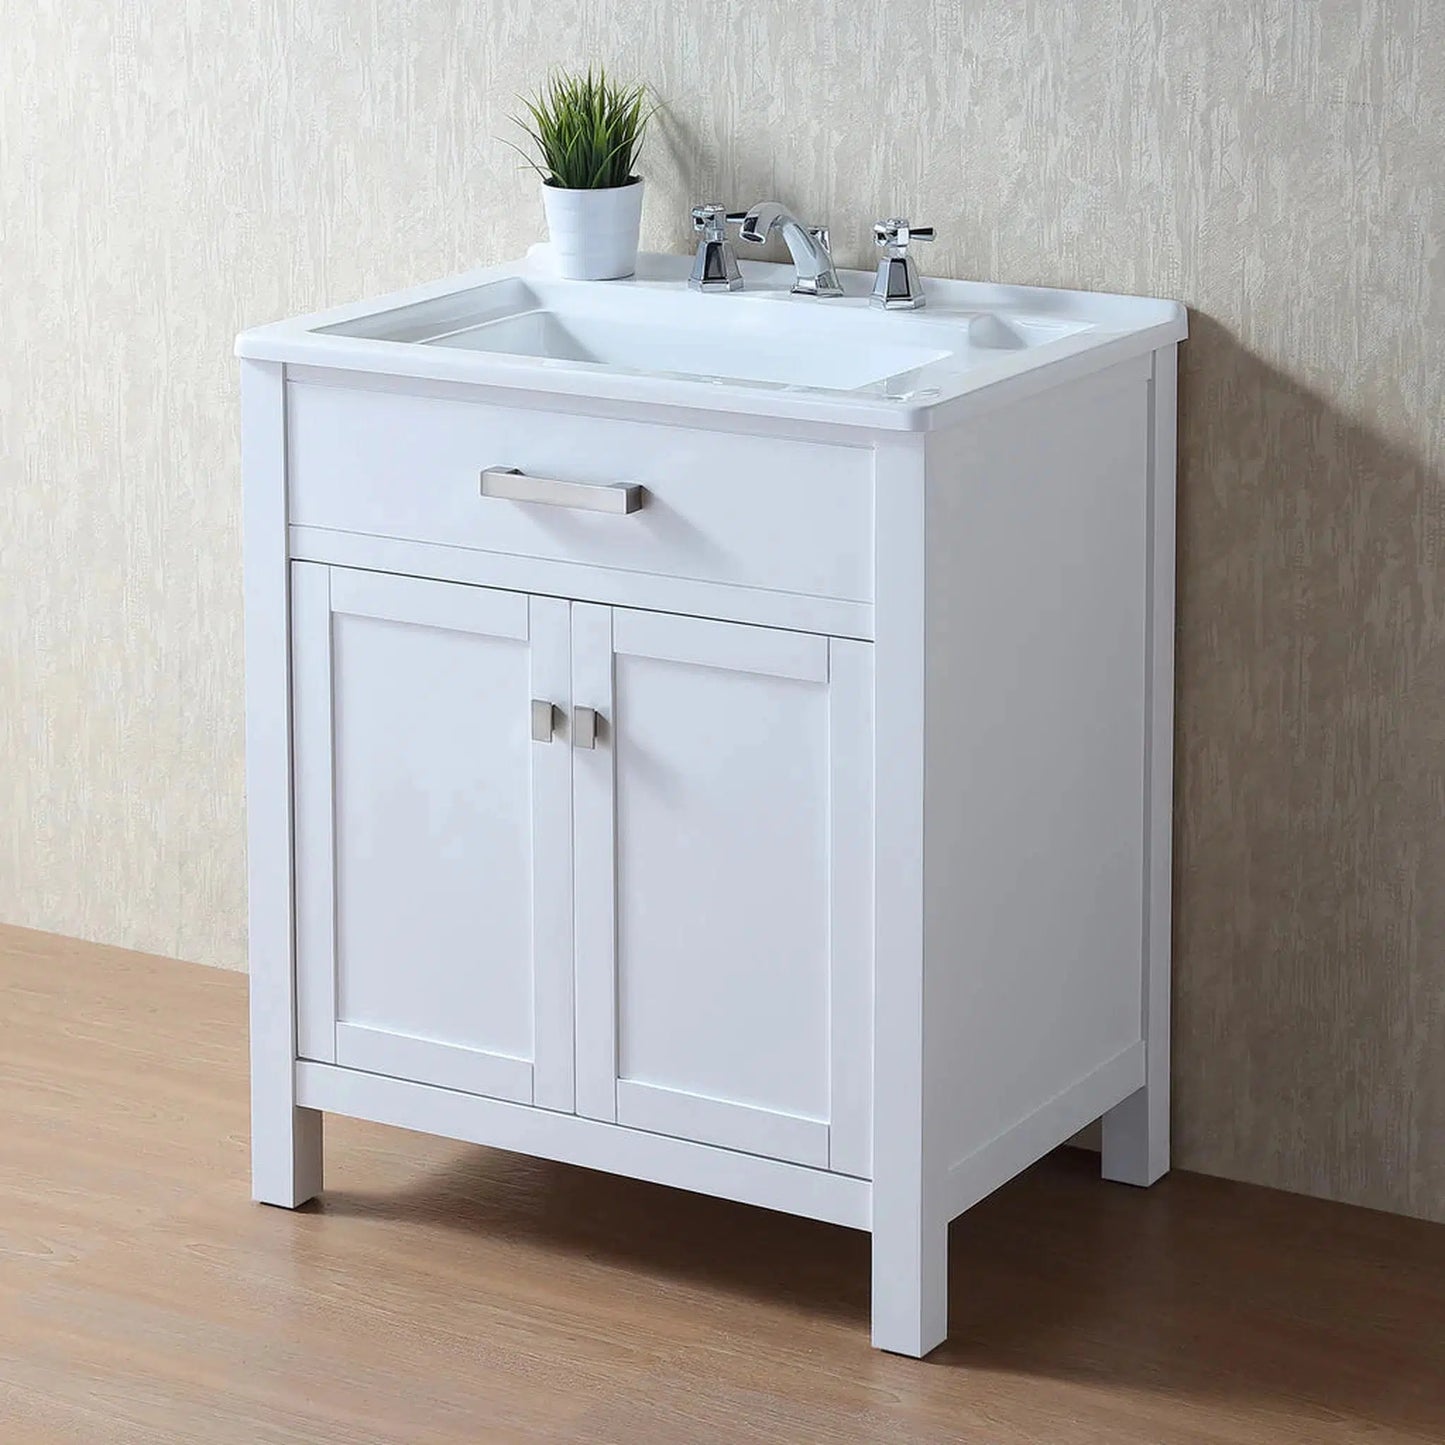 Stufurhome Luthor 30" White Freestanding Laundry Utility With Deep Acrylic Sink Basin, 2 Doors and Widespread Faucet Holes